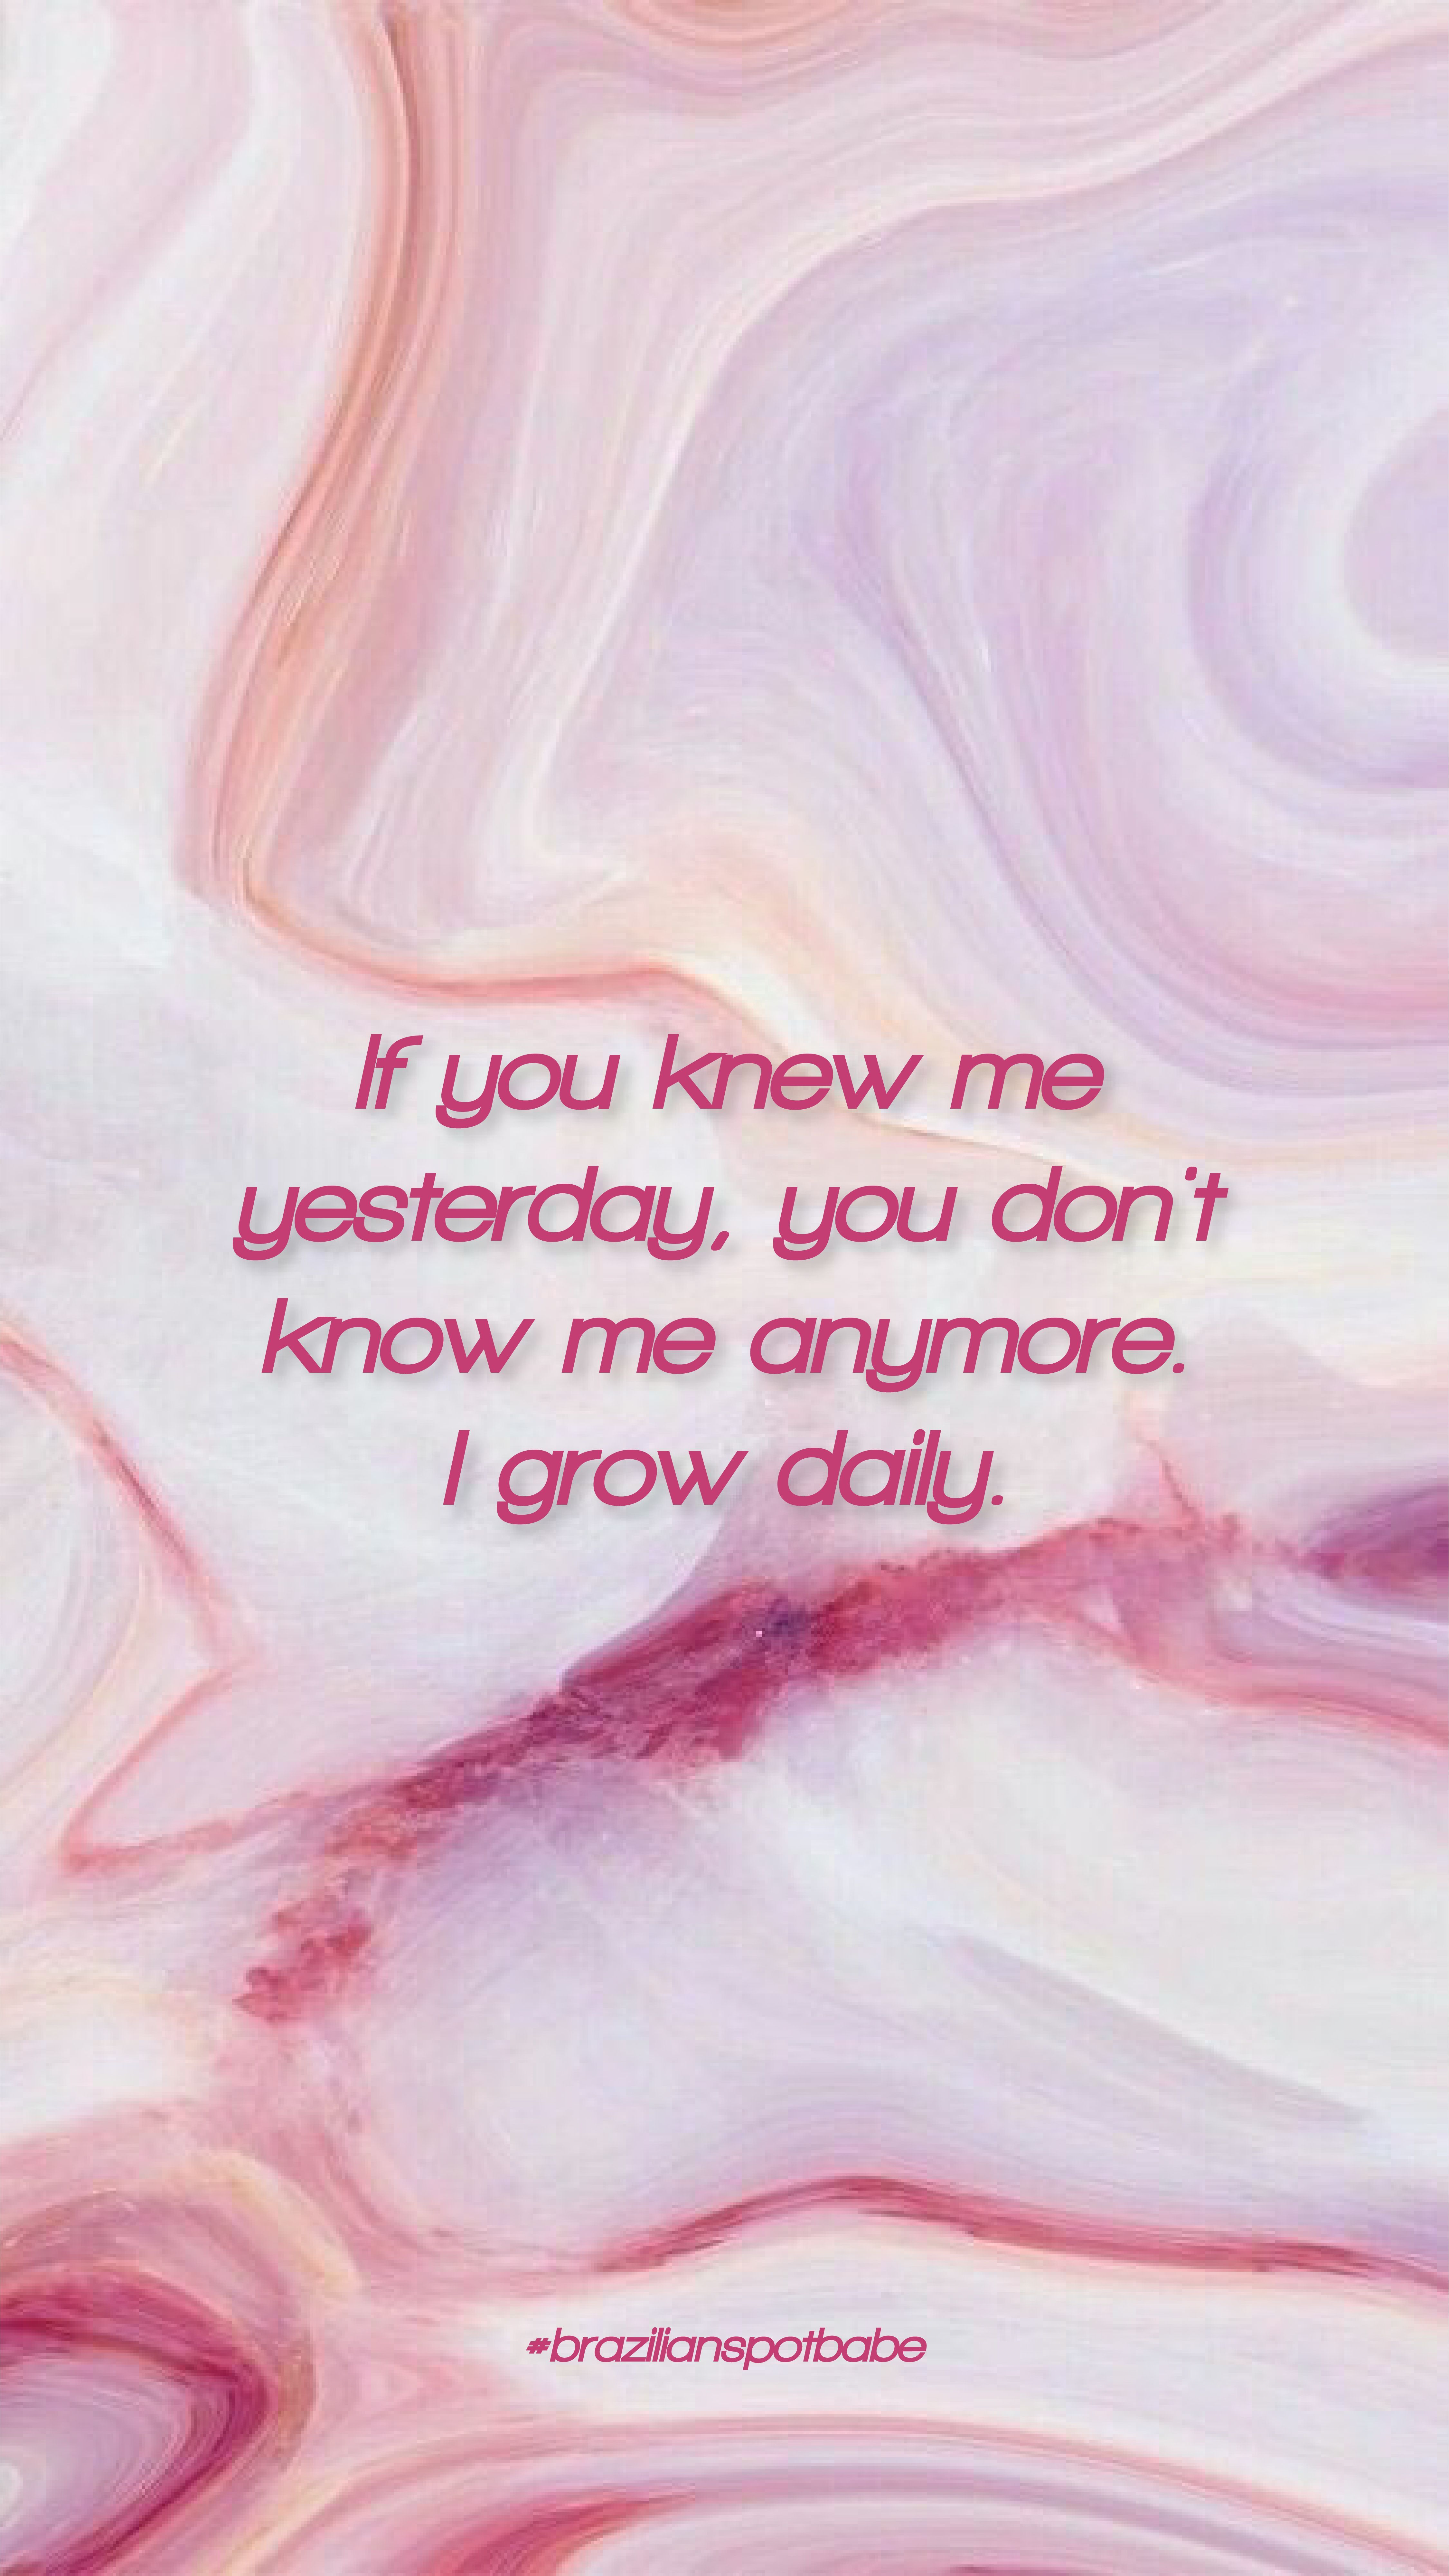 If you knew me yesterday, you don't know me anymore. I grow daily